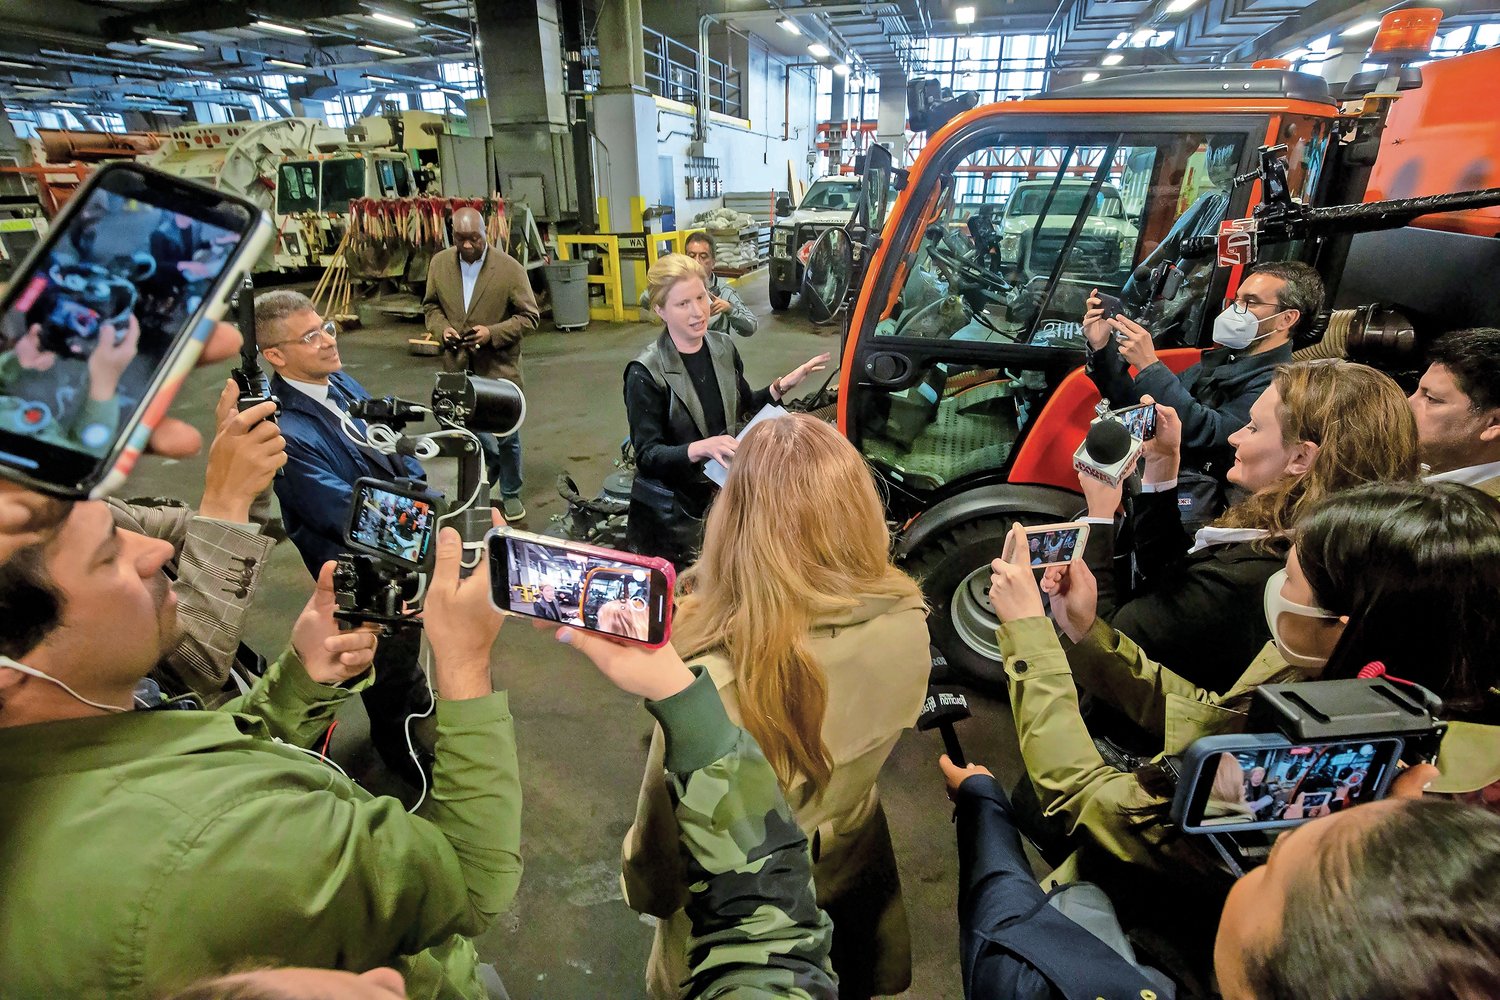 New York City sanitation commissioner Jessica S. Tisch shows off new street sweeper equipment, part of an $11 million investment to clean streets.